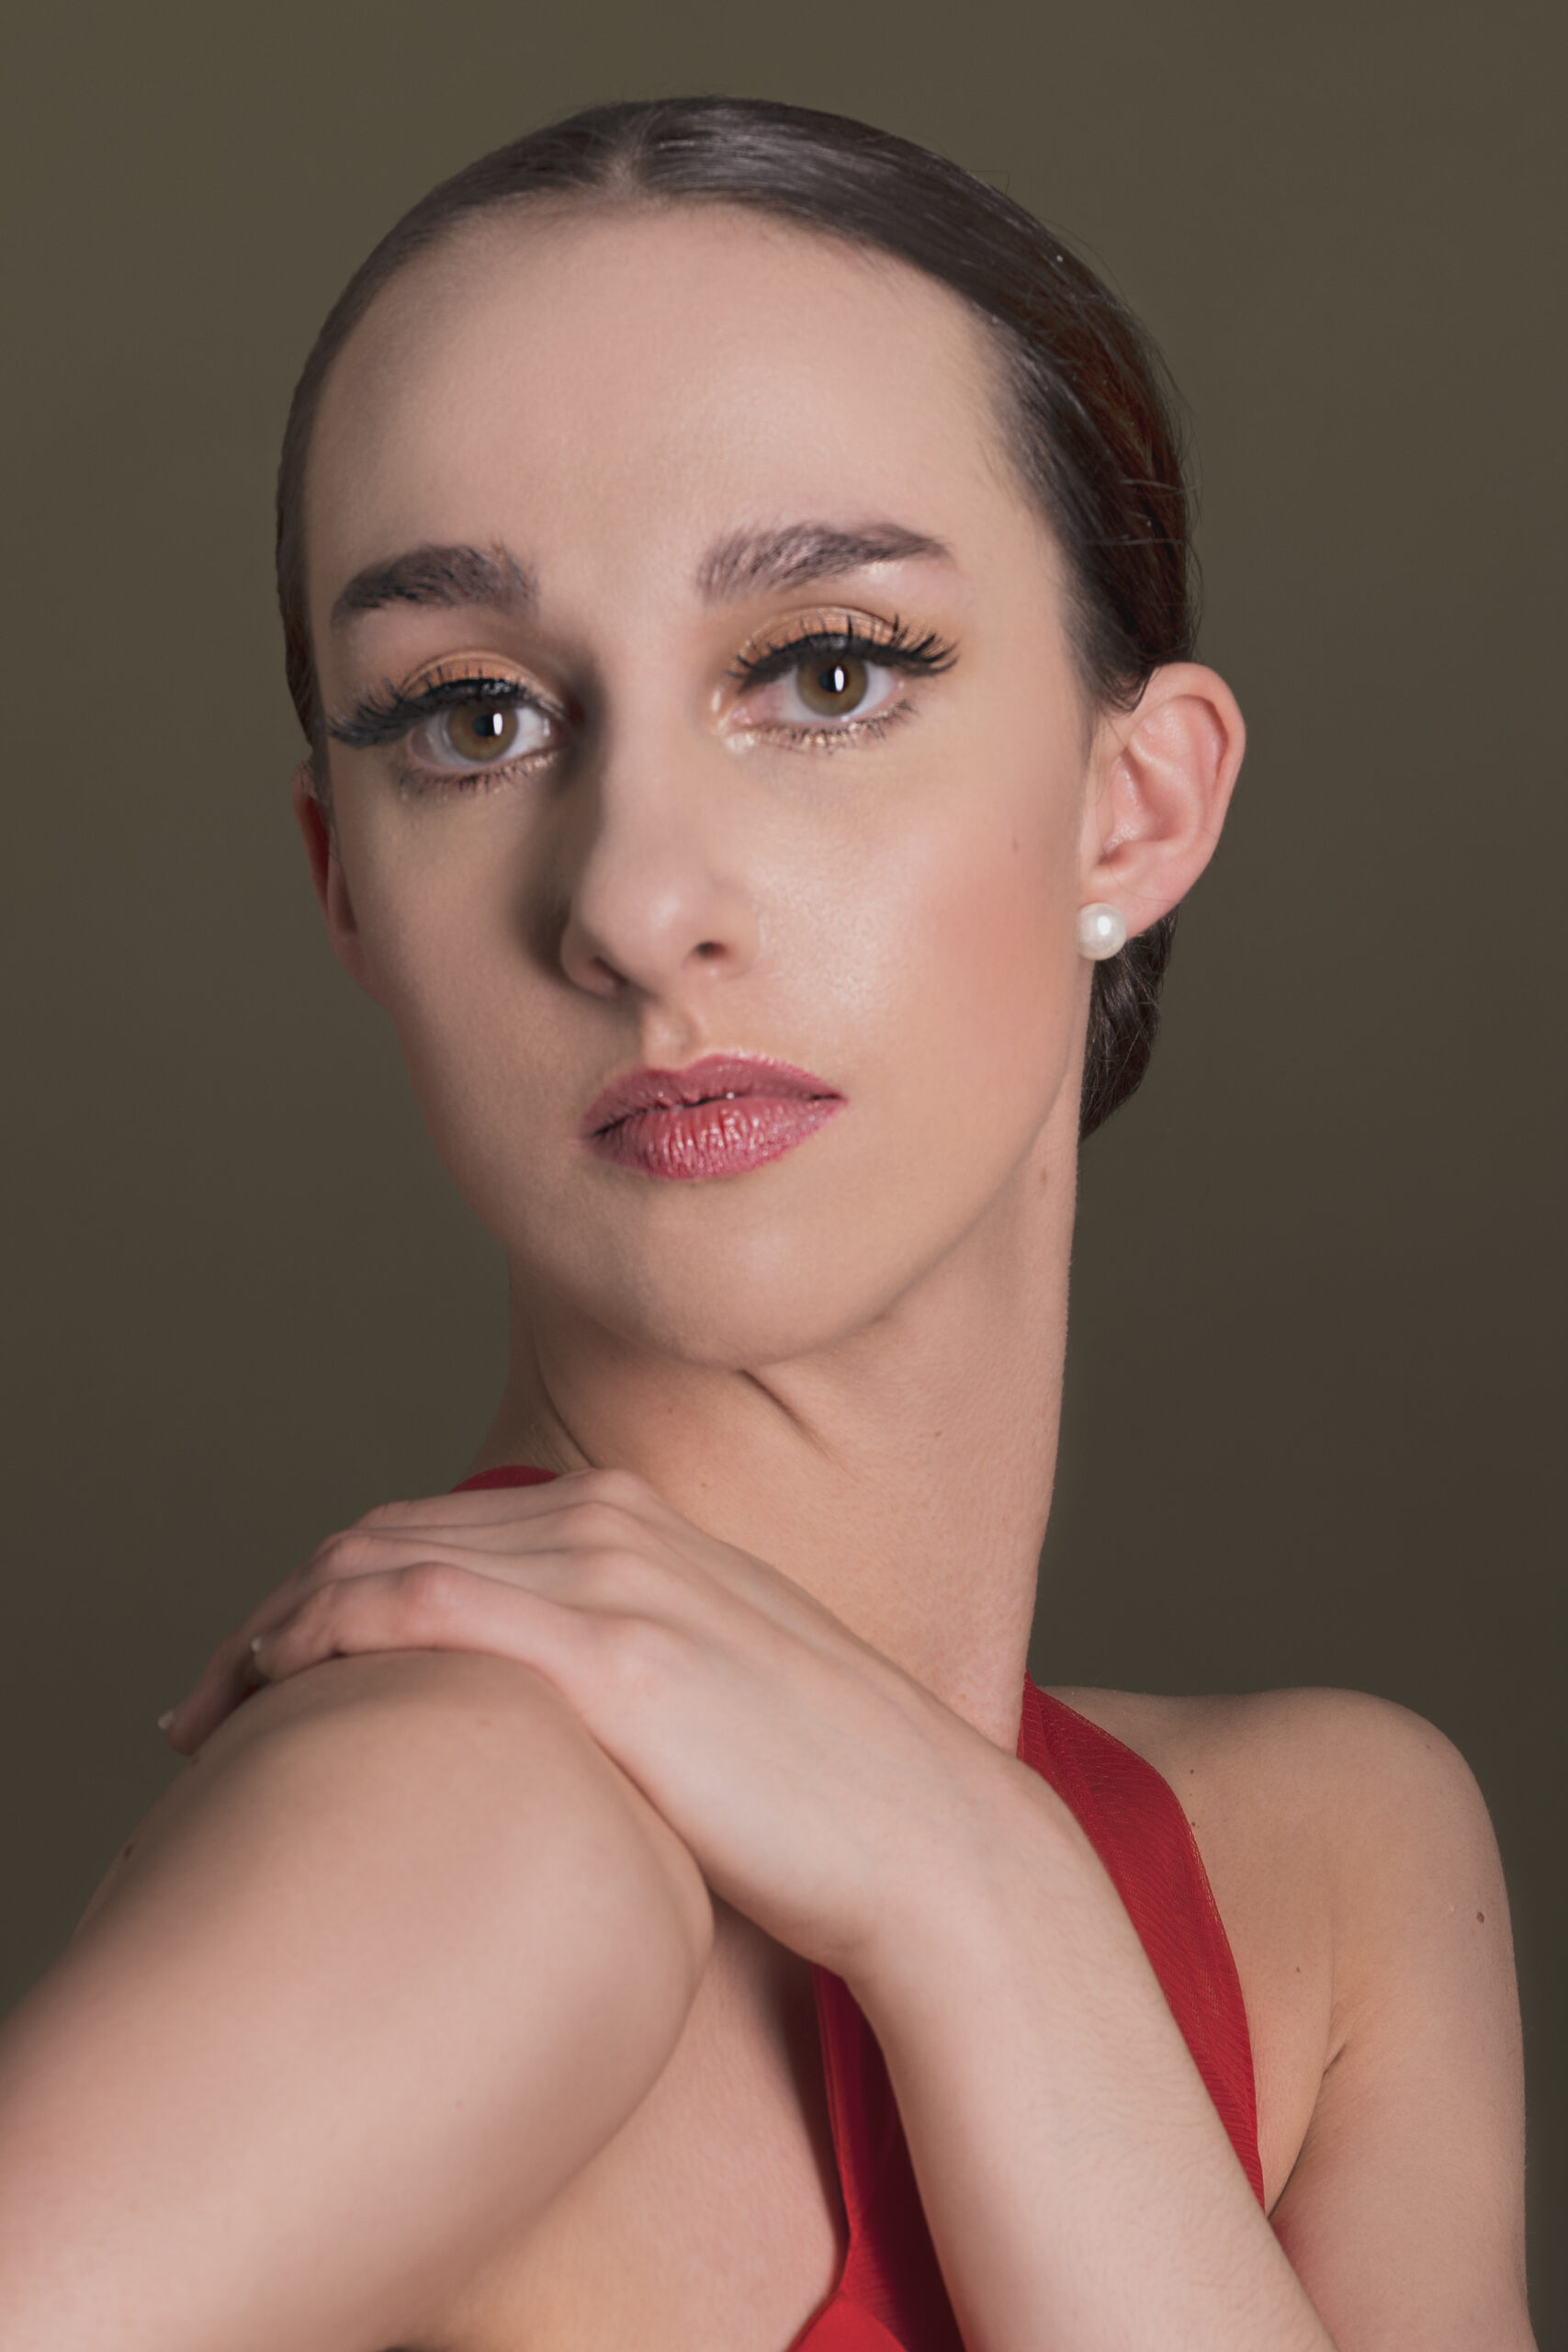 Image of Erica, a ballerina. A portrait of Erica looking directly at the camera